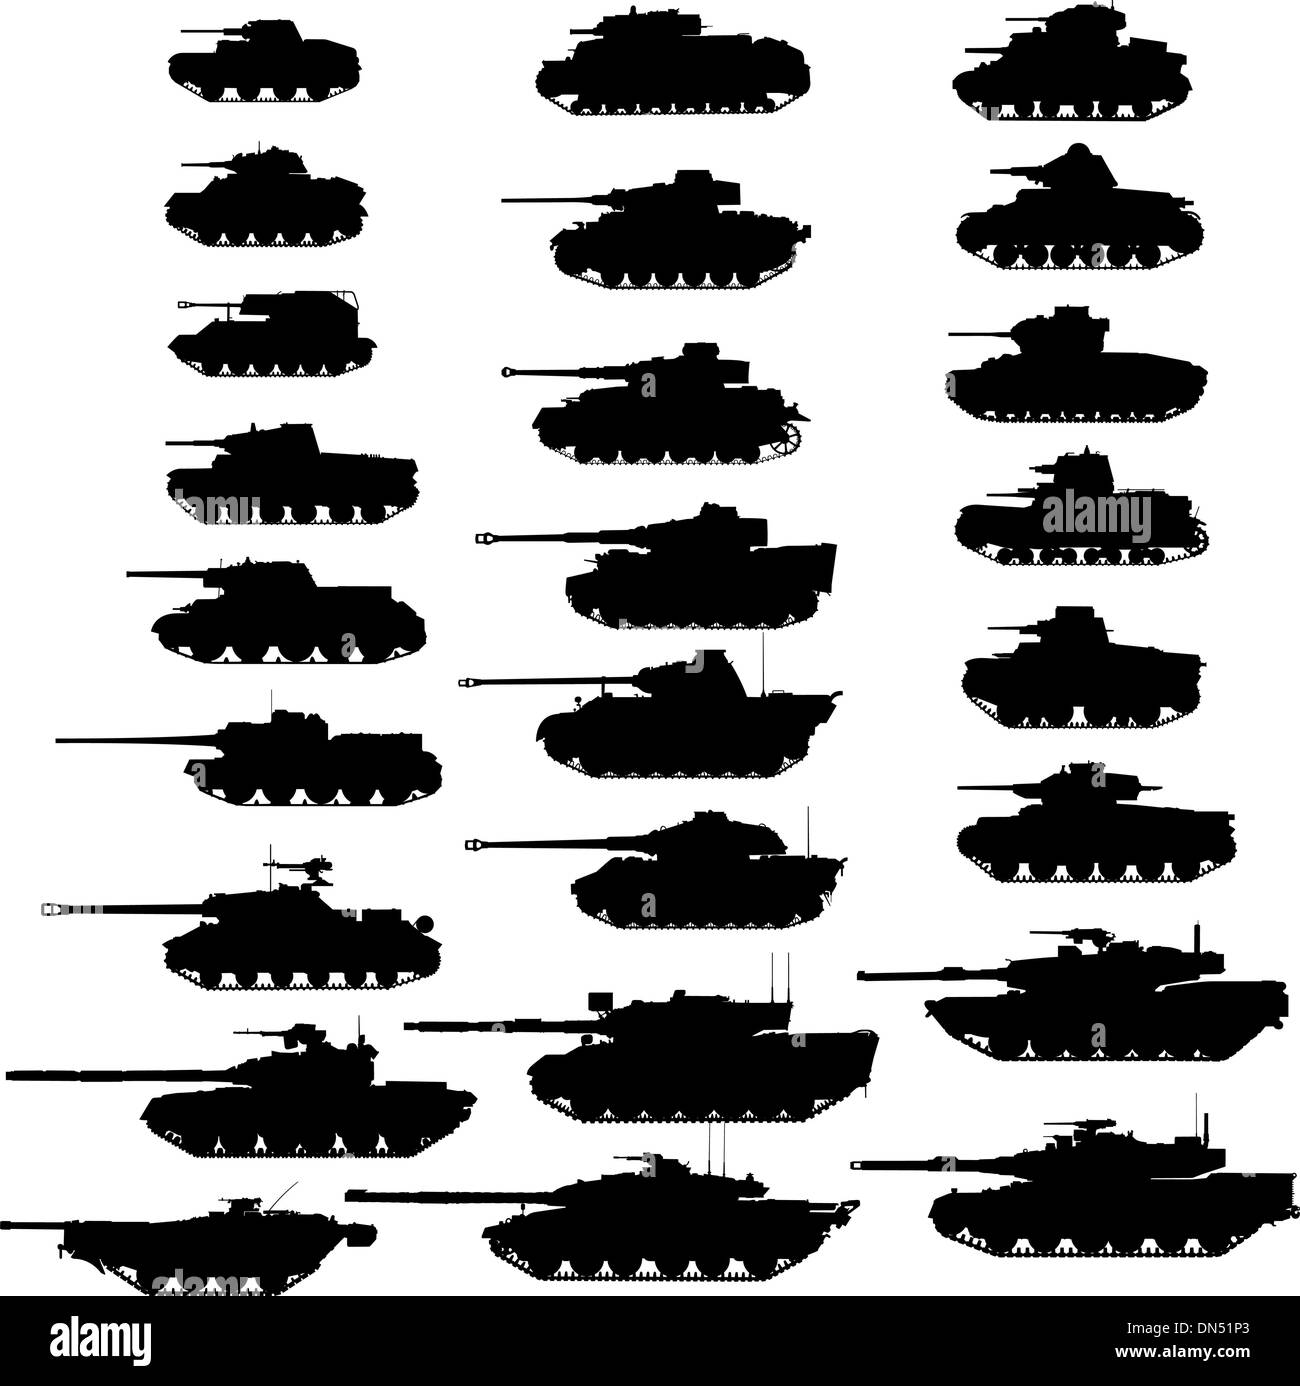 Evolution Of The Tank. Stock Vector